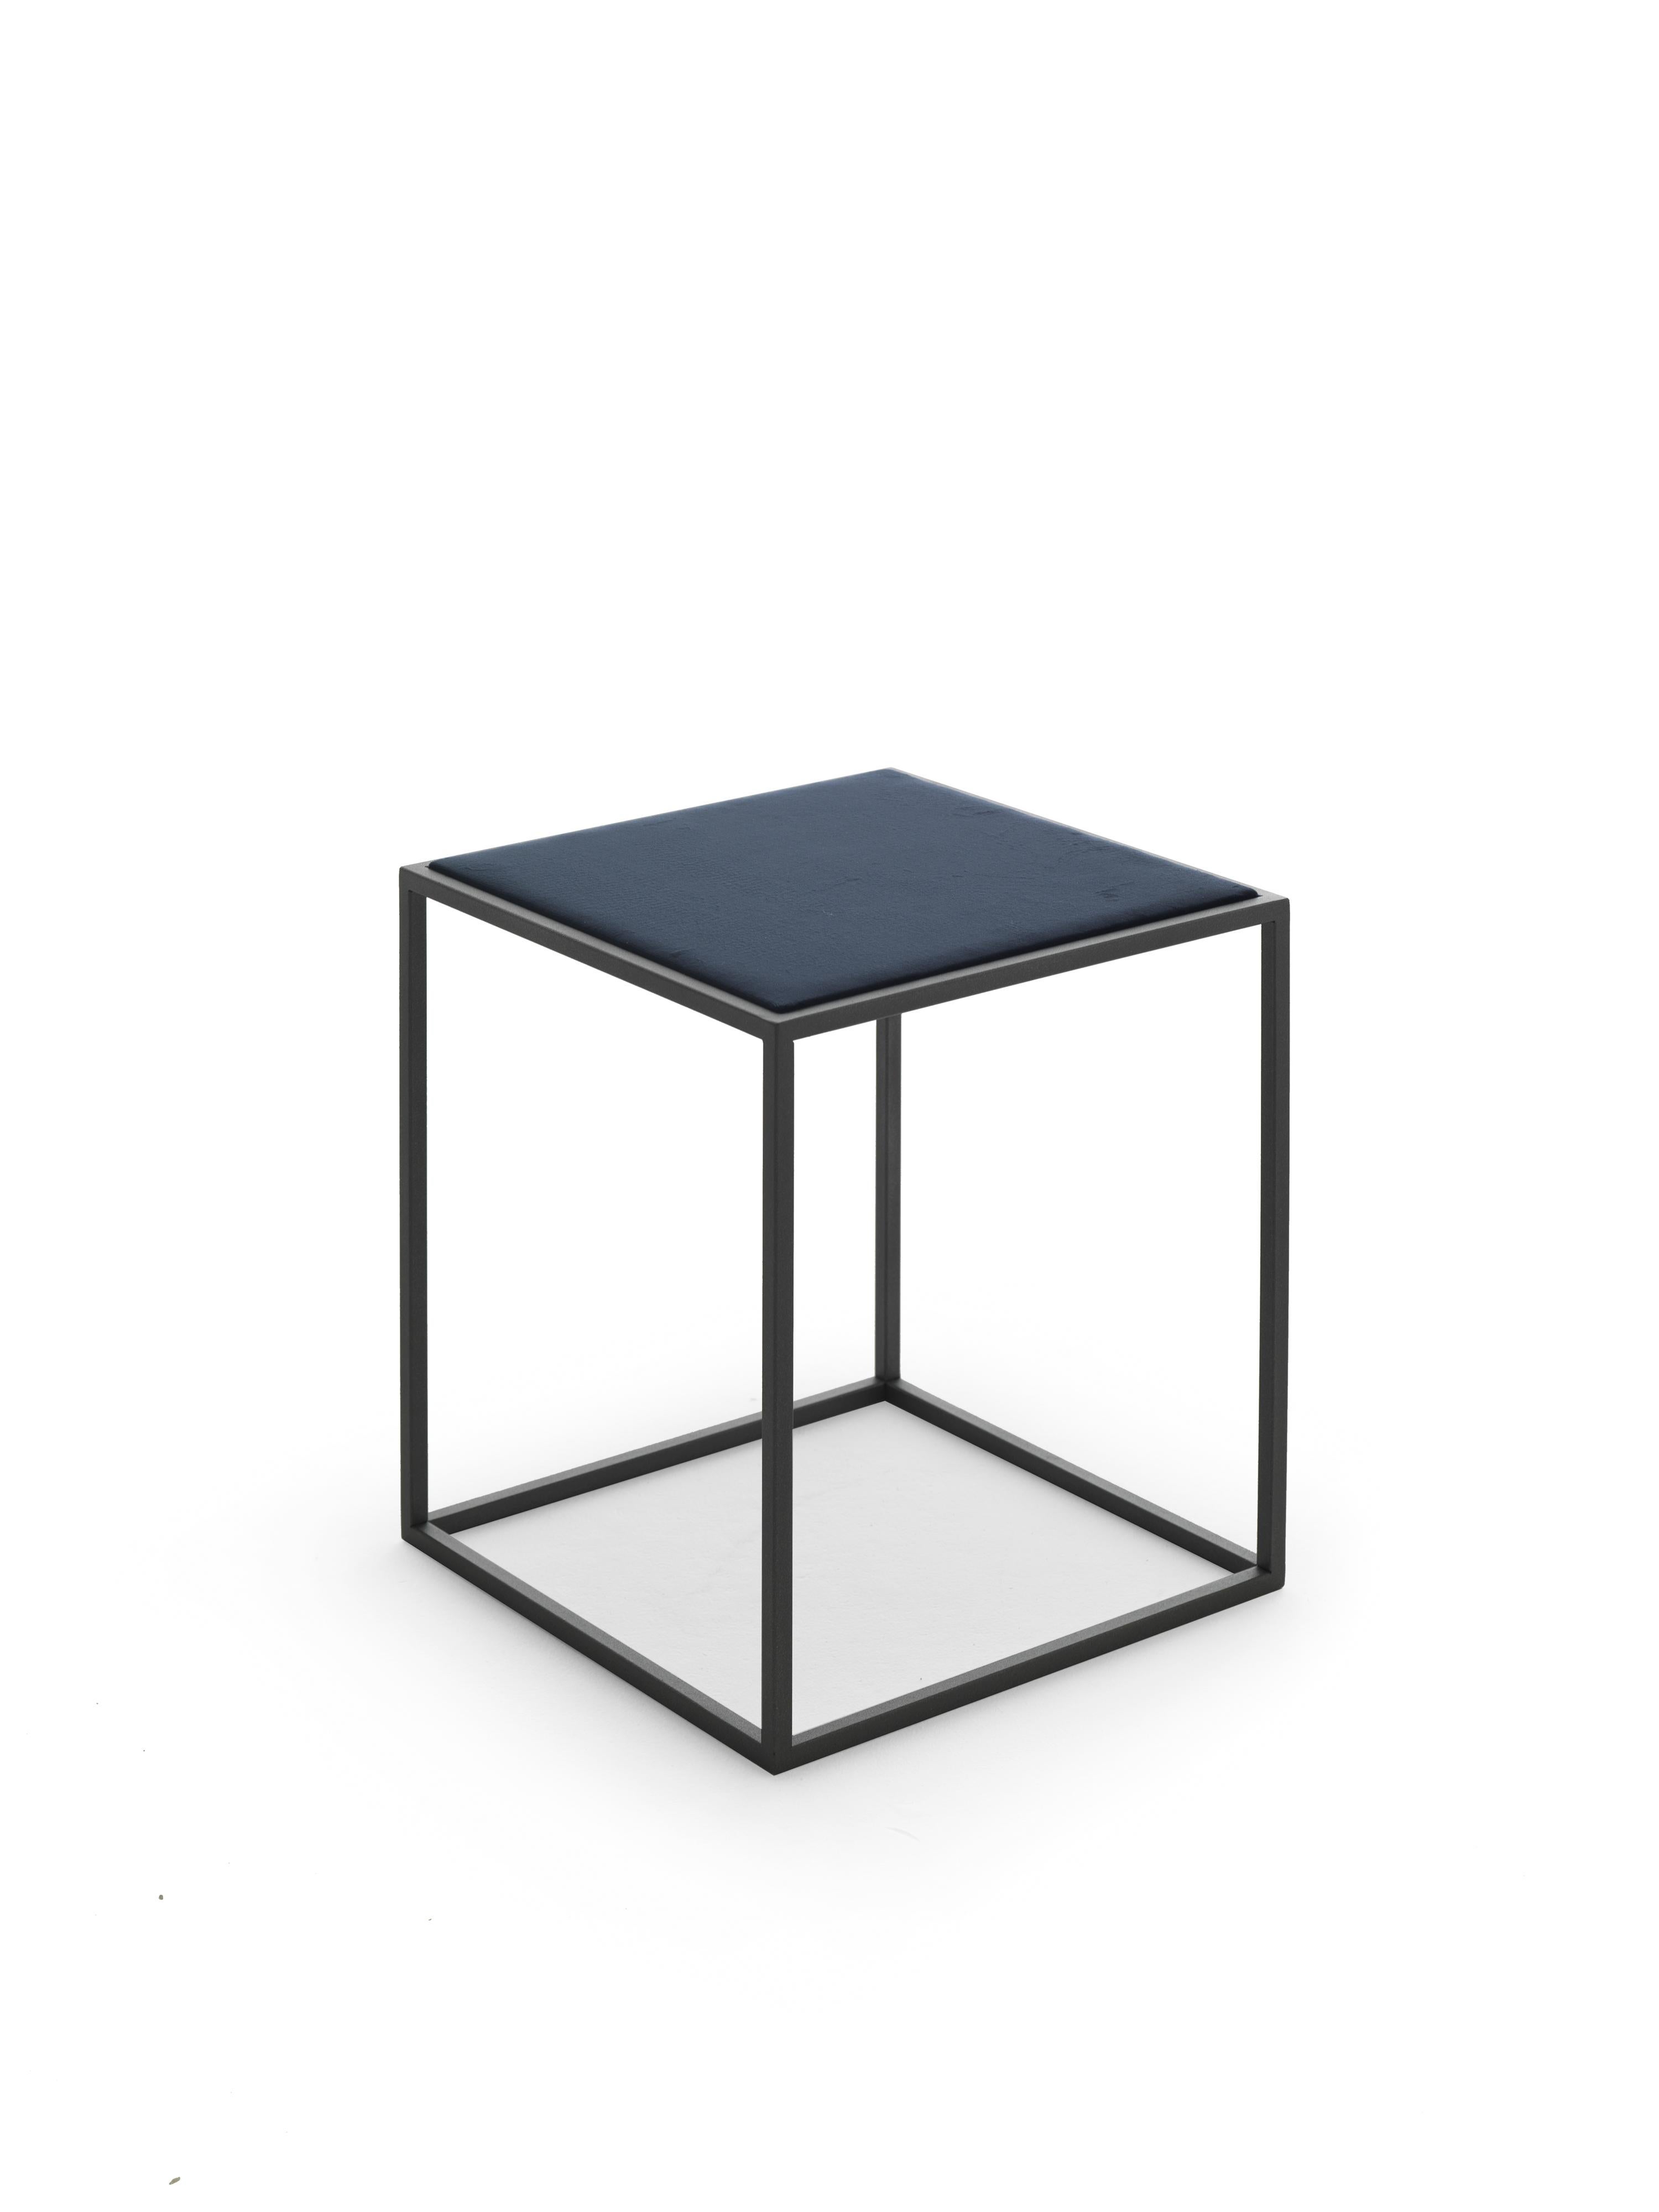 Welded 21st Century Modern Painted Steel Side Tables With Tops In Cotton Velvet For Sale